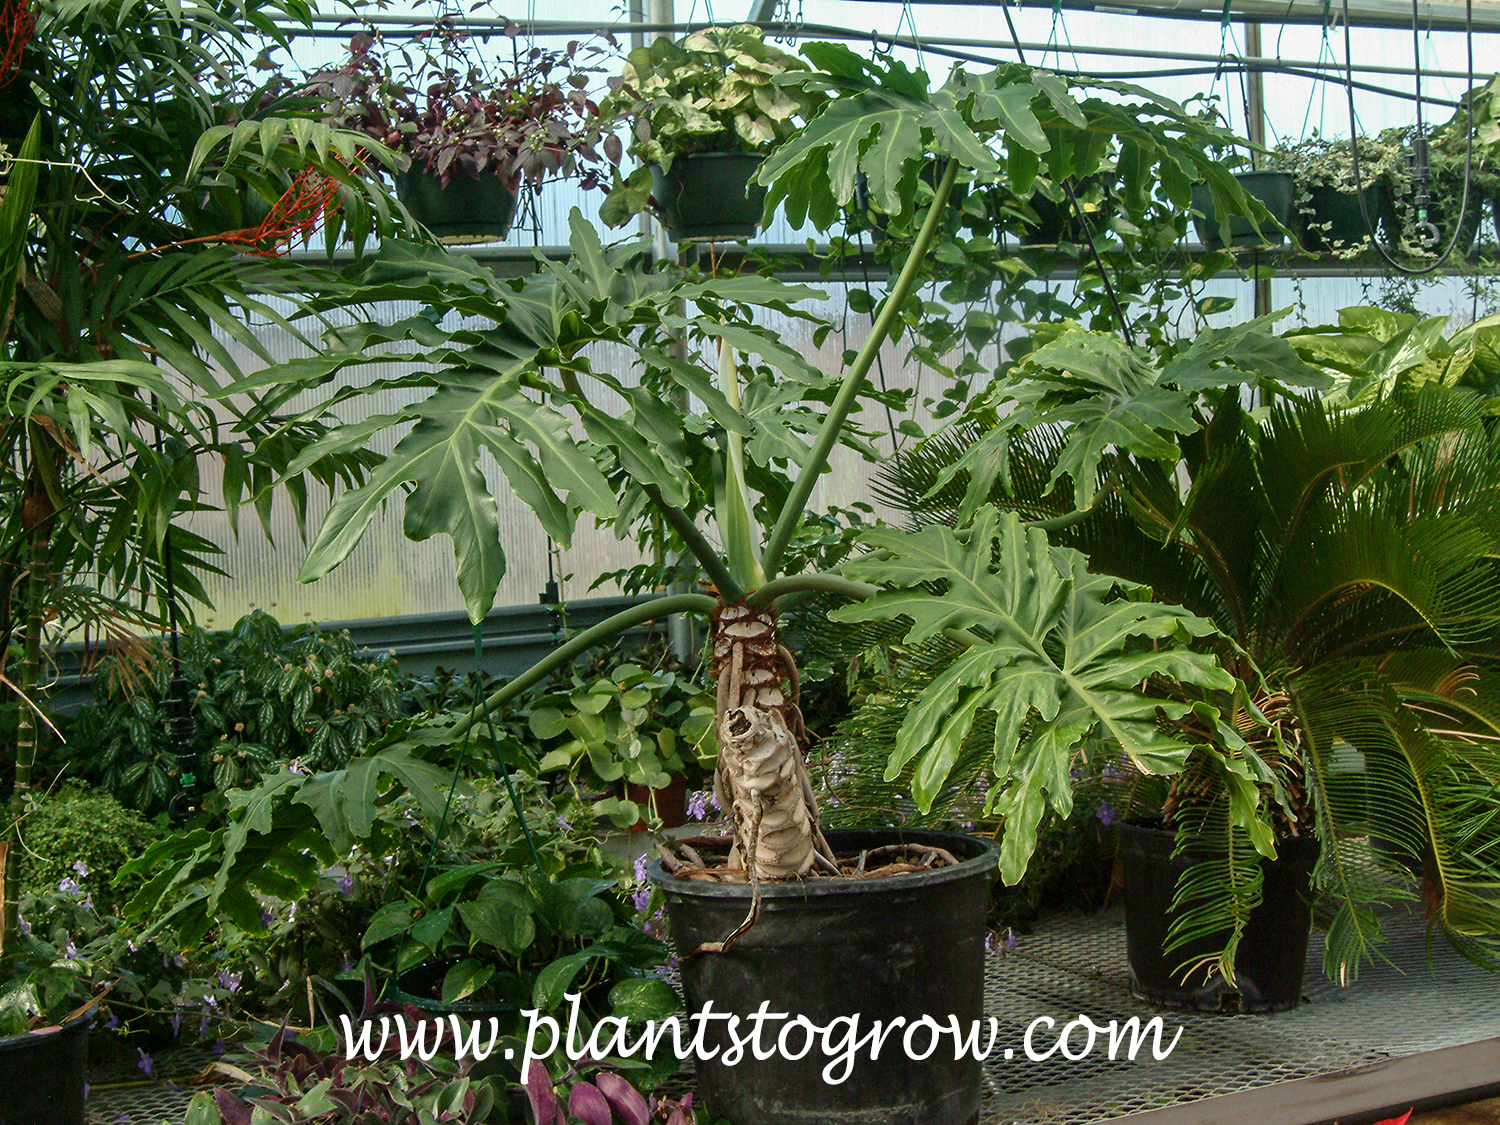 Selloum Philodendron (Philodendron bipinnatifidum)
This plant is over 25 years old.  Would be larger but is used in a dim indoor area and is brought into the greenhouse for some R and R to recover and regrow.